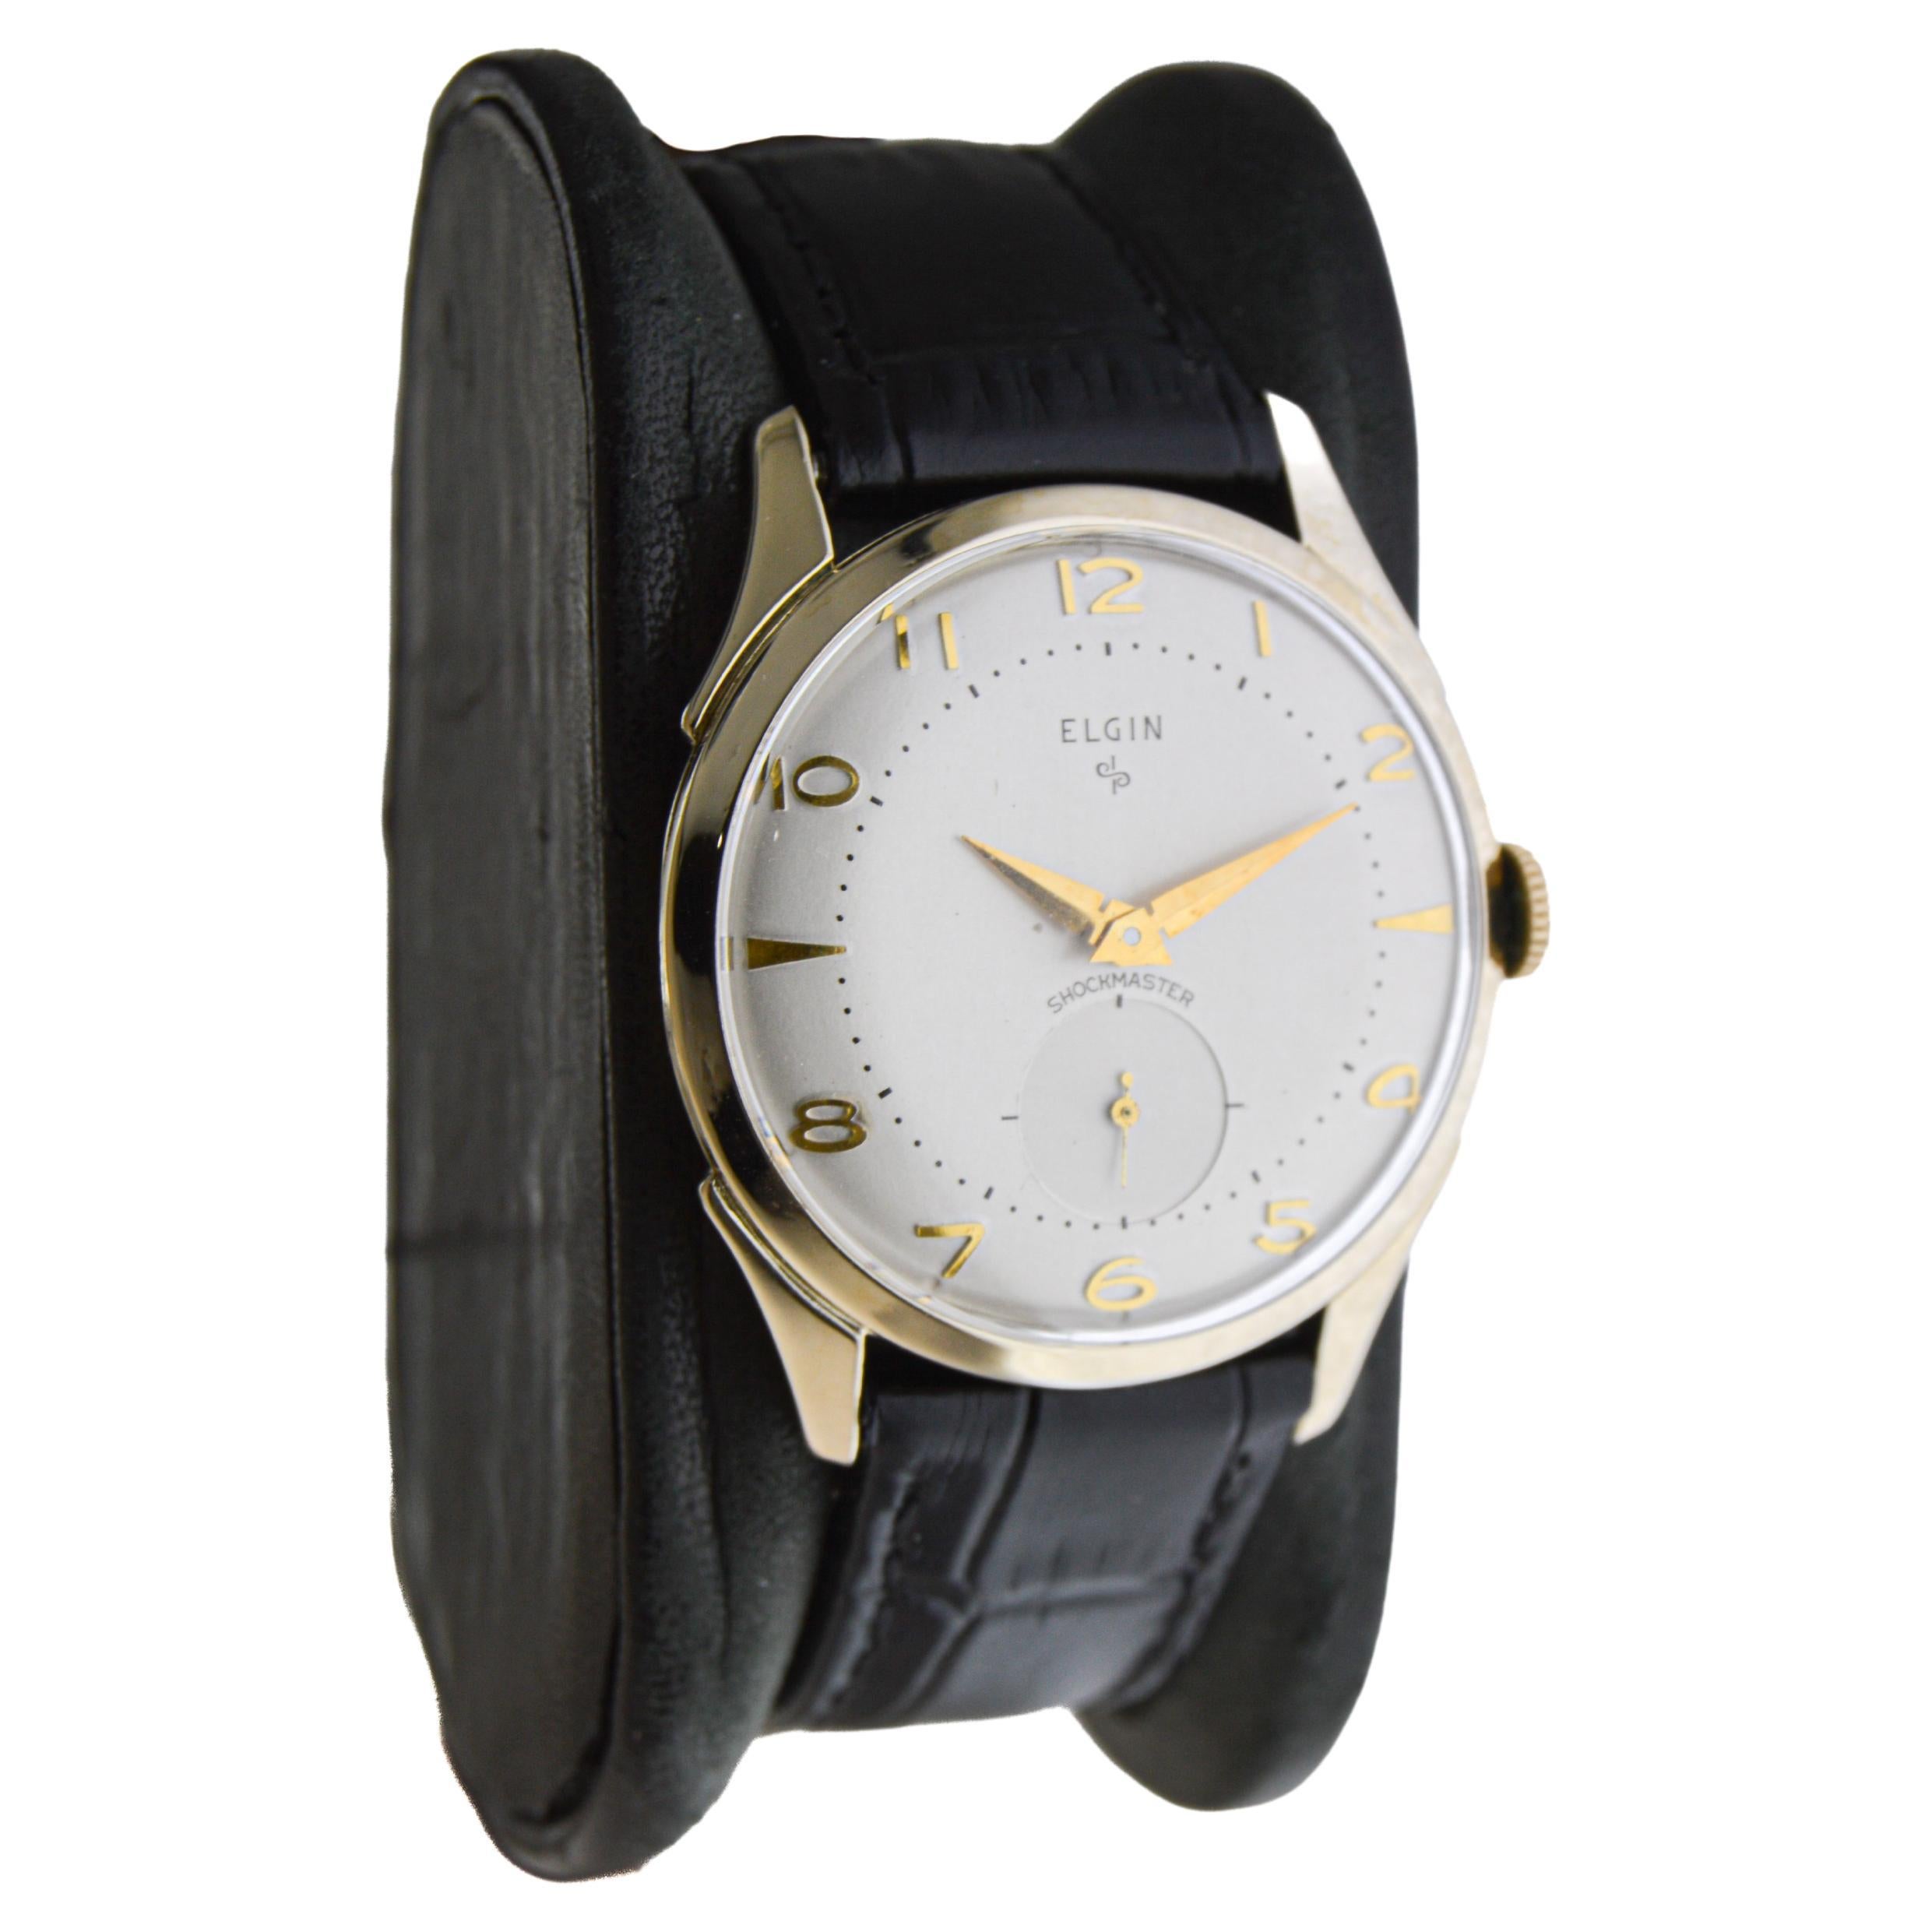 FACTORY / HOUSE: Elgin Watch Company
STYLE / REFERENCE: Art Deco / Round 
METAL / MATERIAL: Yellow Gold Filled 
CIRCA / YEAR: 1950's
DIMENSIONS / SIZE: Length 39mm X Diameter 32mm
MOVEMENT / CALIBER: Manual Winding / 17 Jewels / Caliber 712
DIAL /